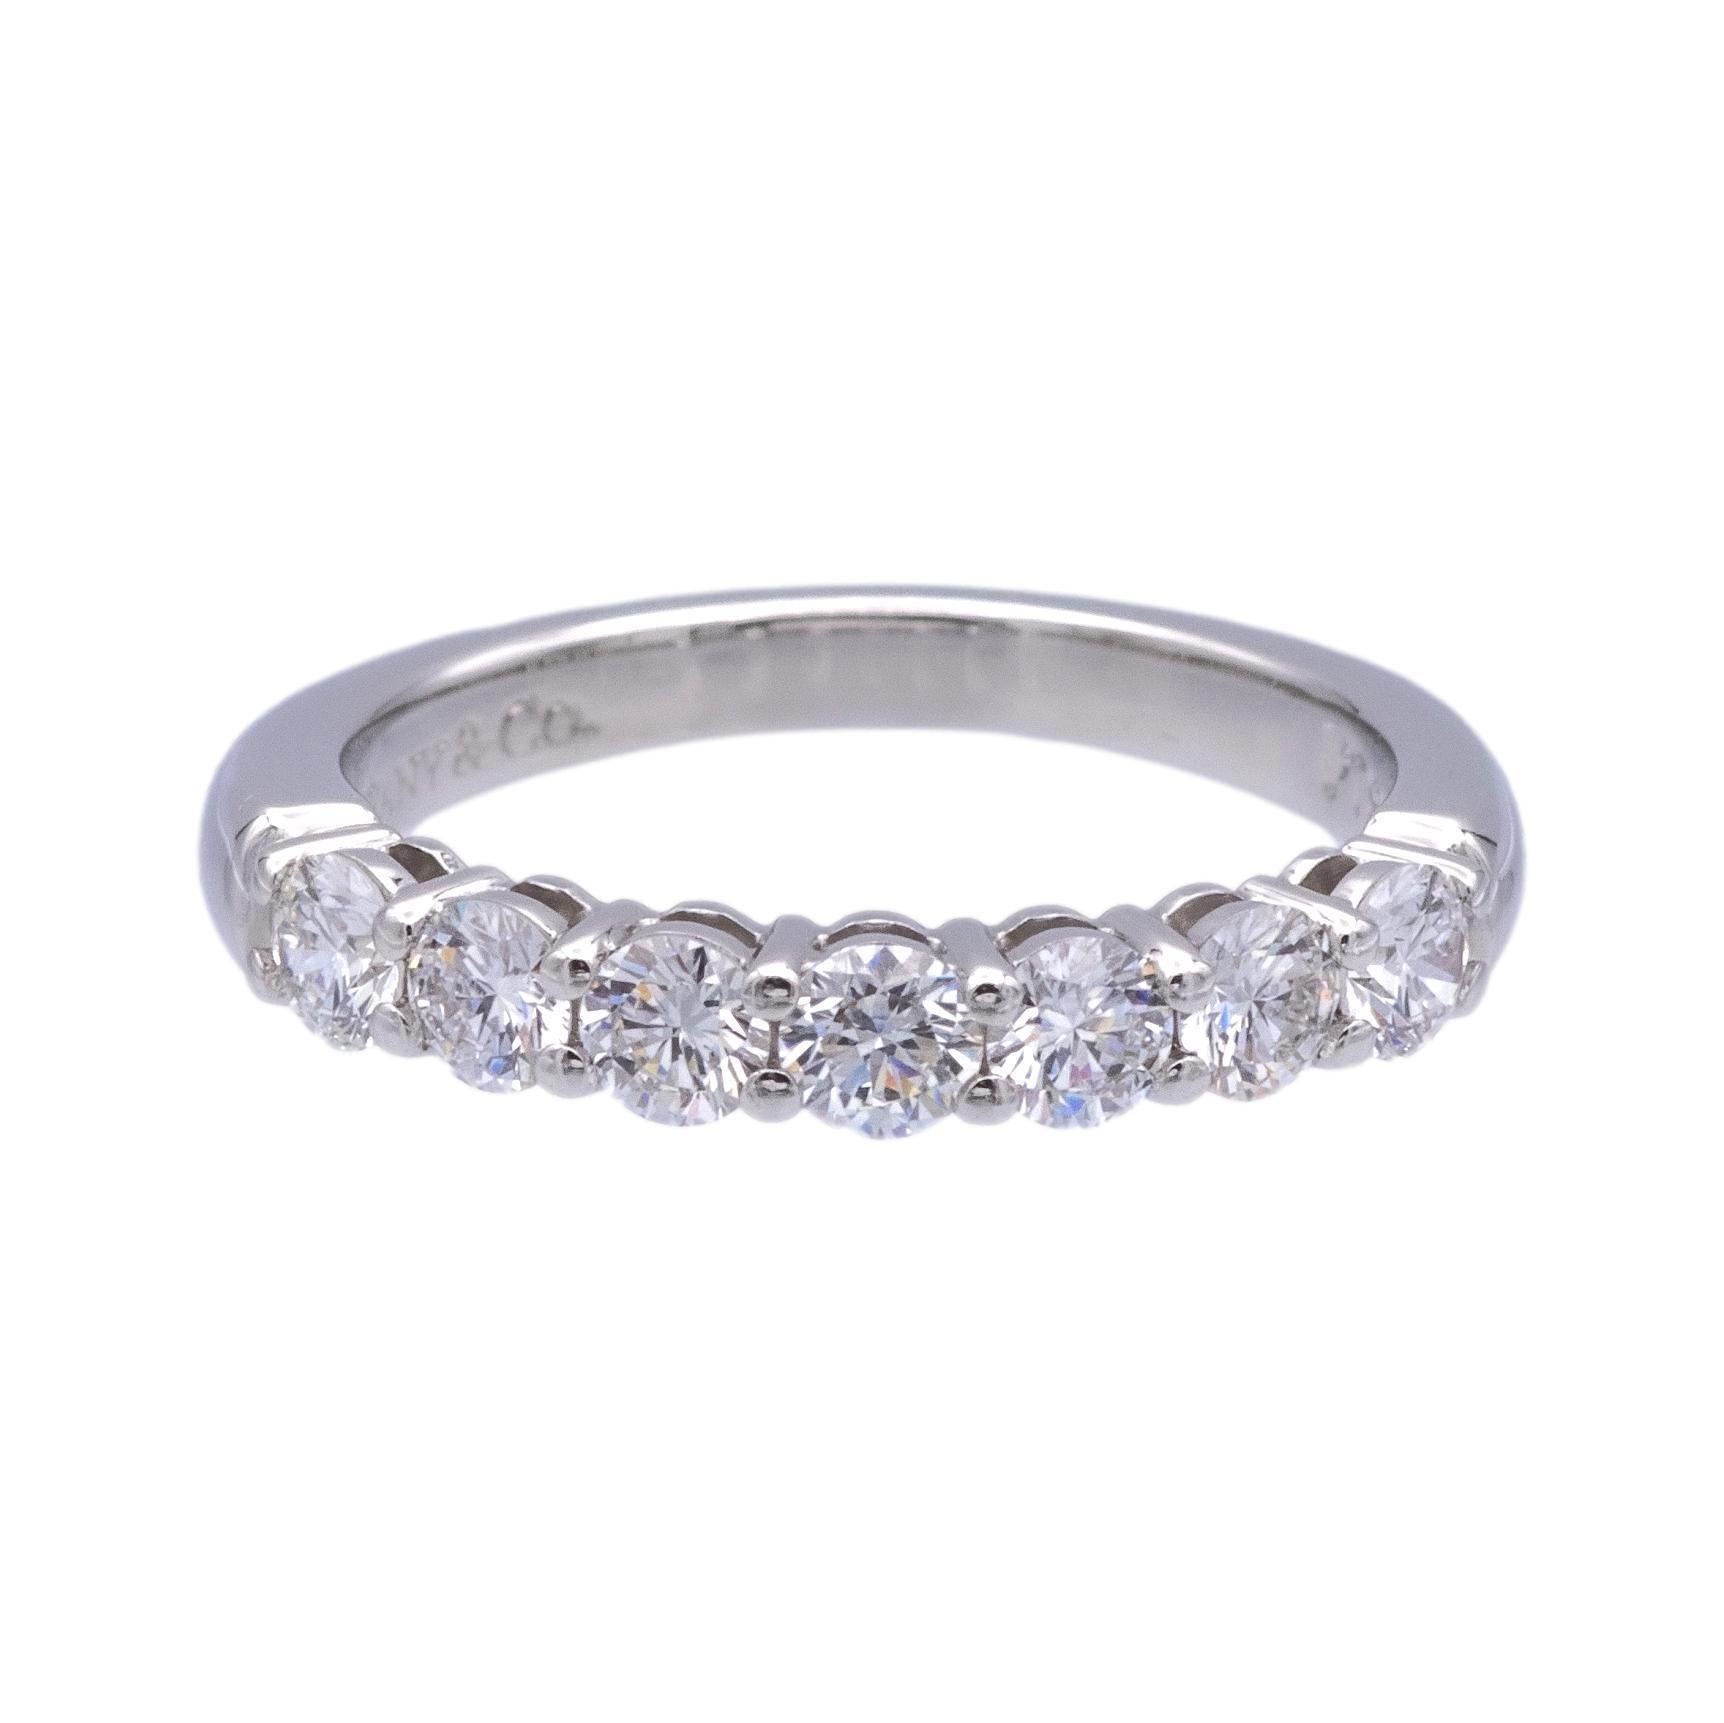 Tiffany & Co. Half Band ring from the Forever collection finely crafted in platinum featuring 7 Round Brilliant cut diamonds set in shared prongs weighing .57 carats total weight. Very bright F-G color , VS clarity. 
Ring measures 3mm wide and is